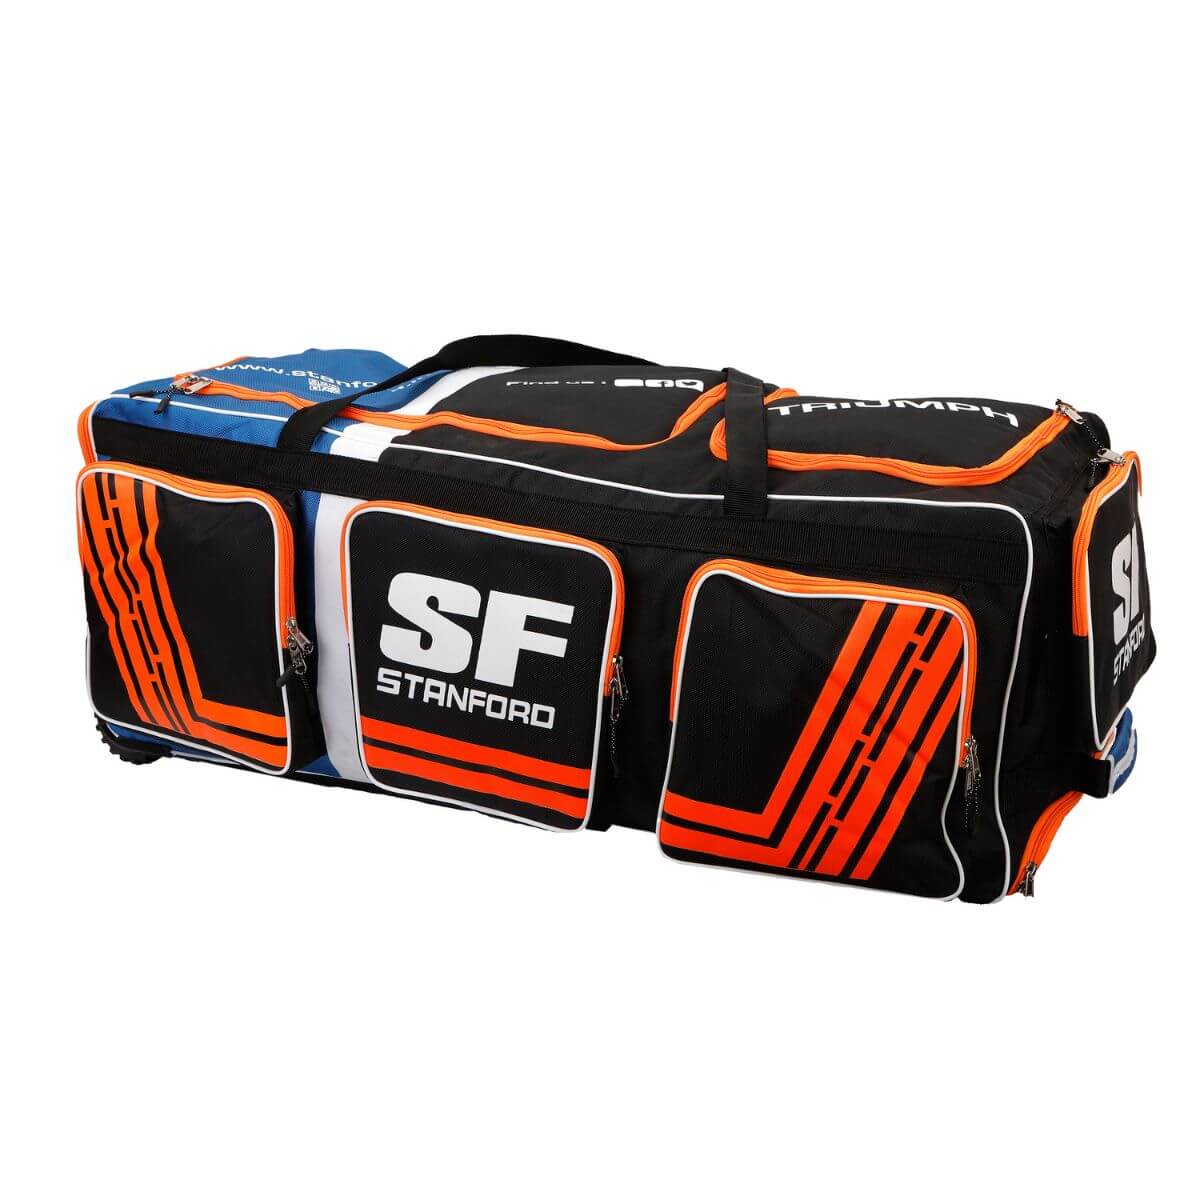 Buy Cricket Kit Bags Online at Best Prices Globally | Robinson Sports